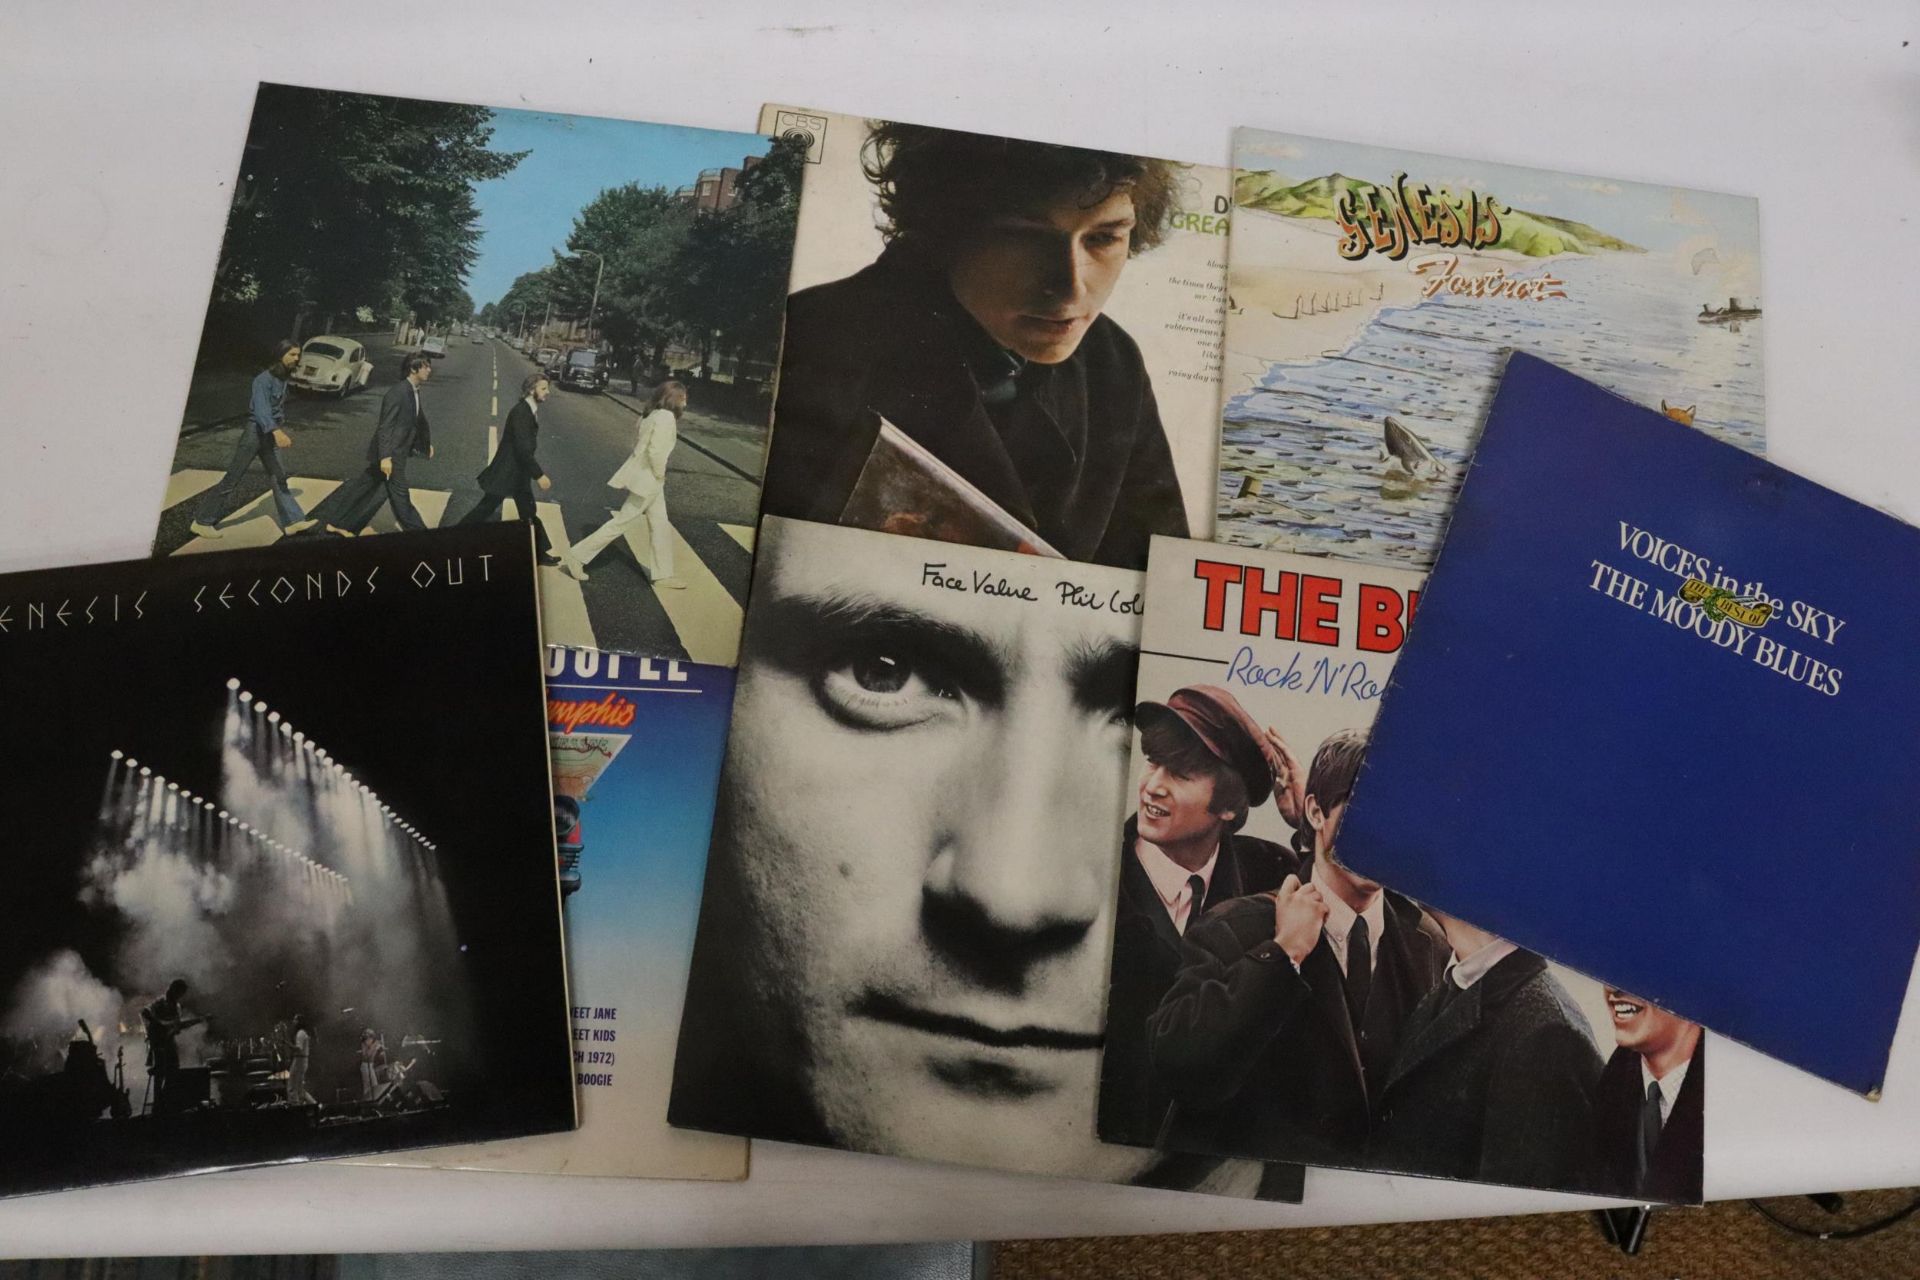 A COLLECTION OF VINYL LP RECORDS TO INCLUDE GENESIS, FOXTROT, THE BEATLES, ABBEY ROAD, BOB DYLAN,